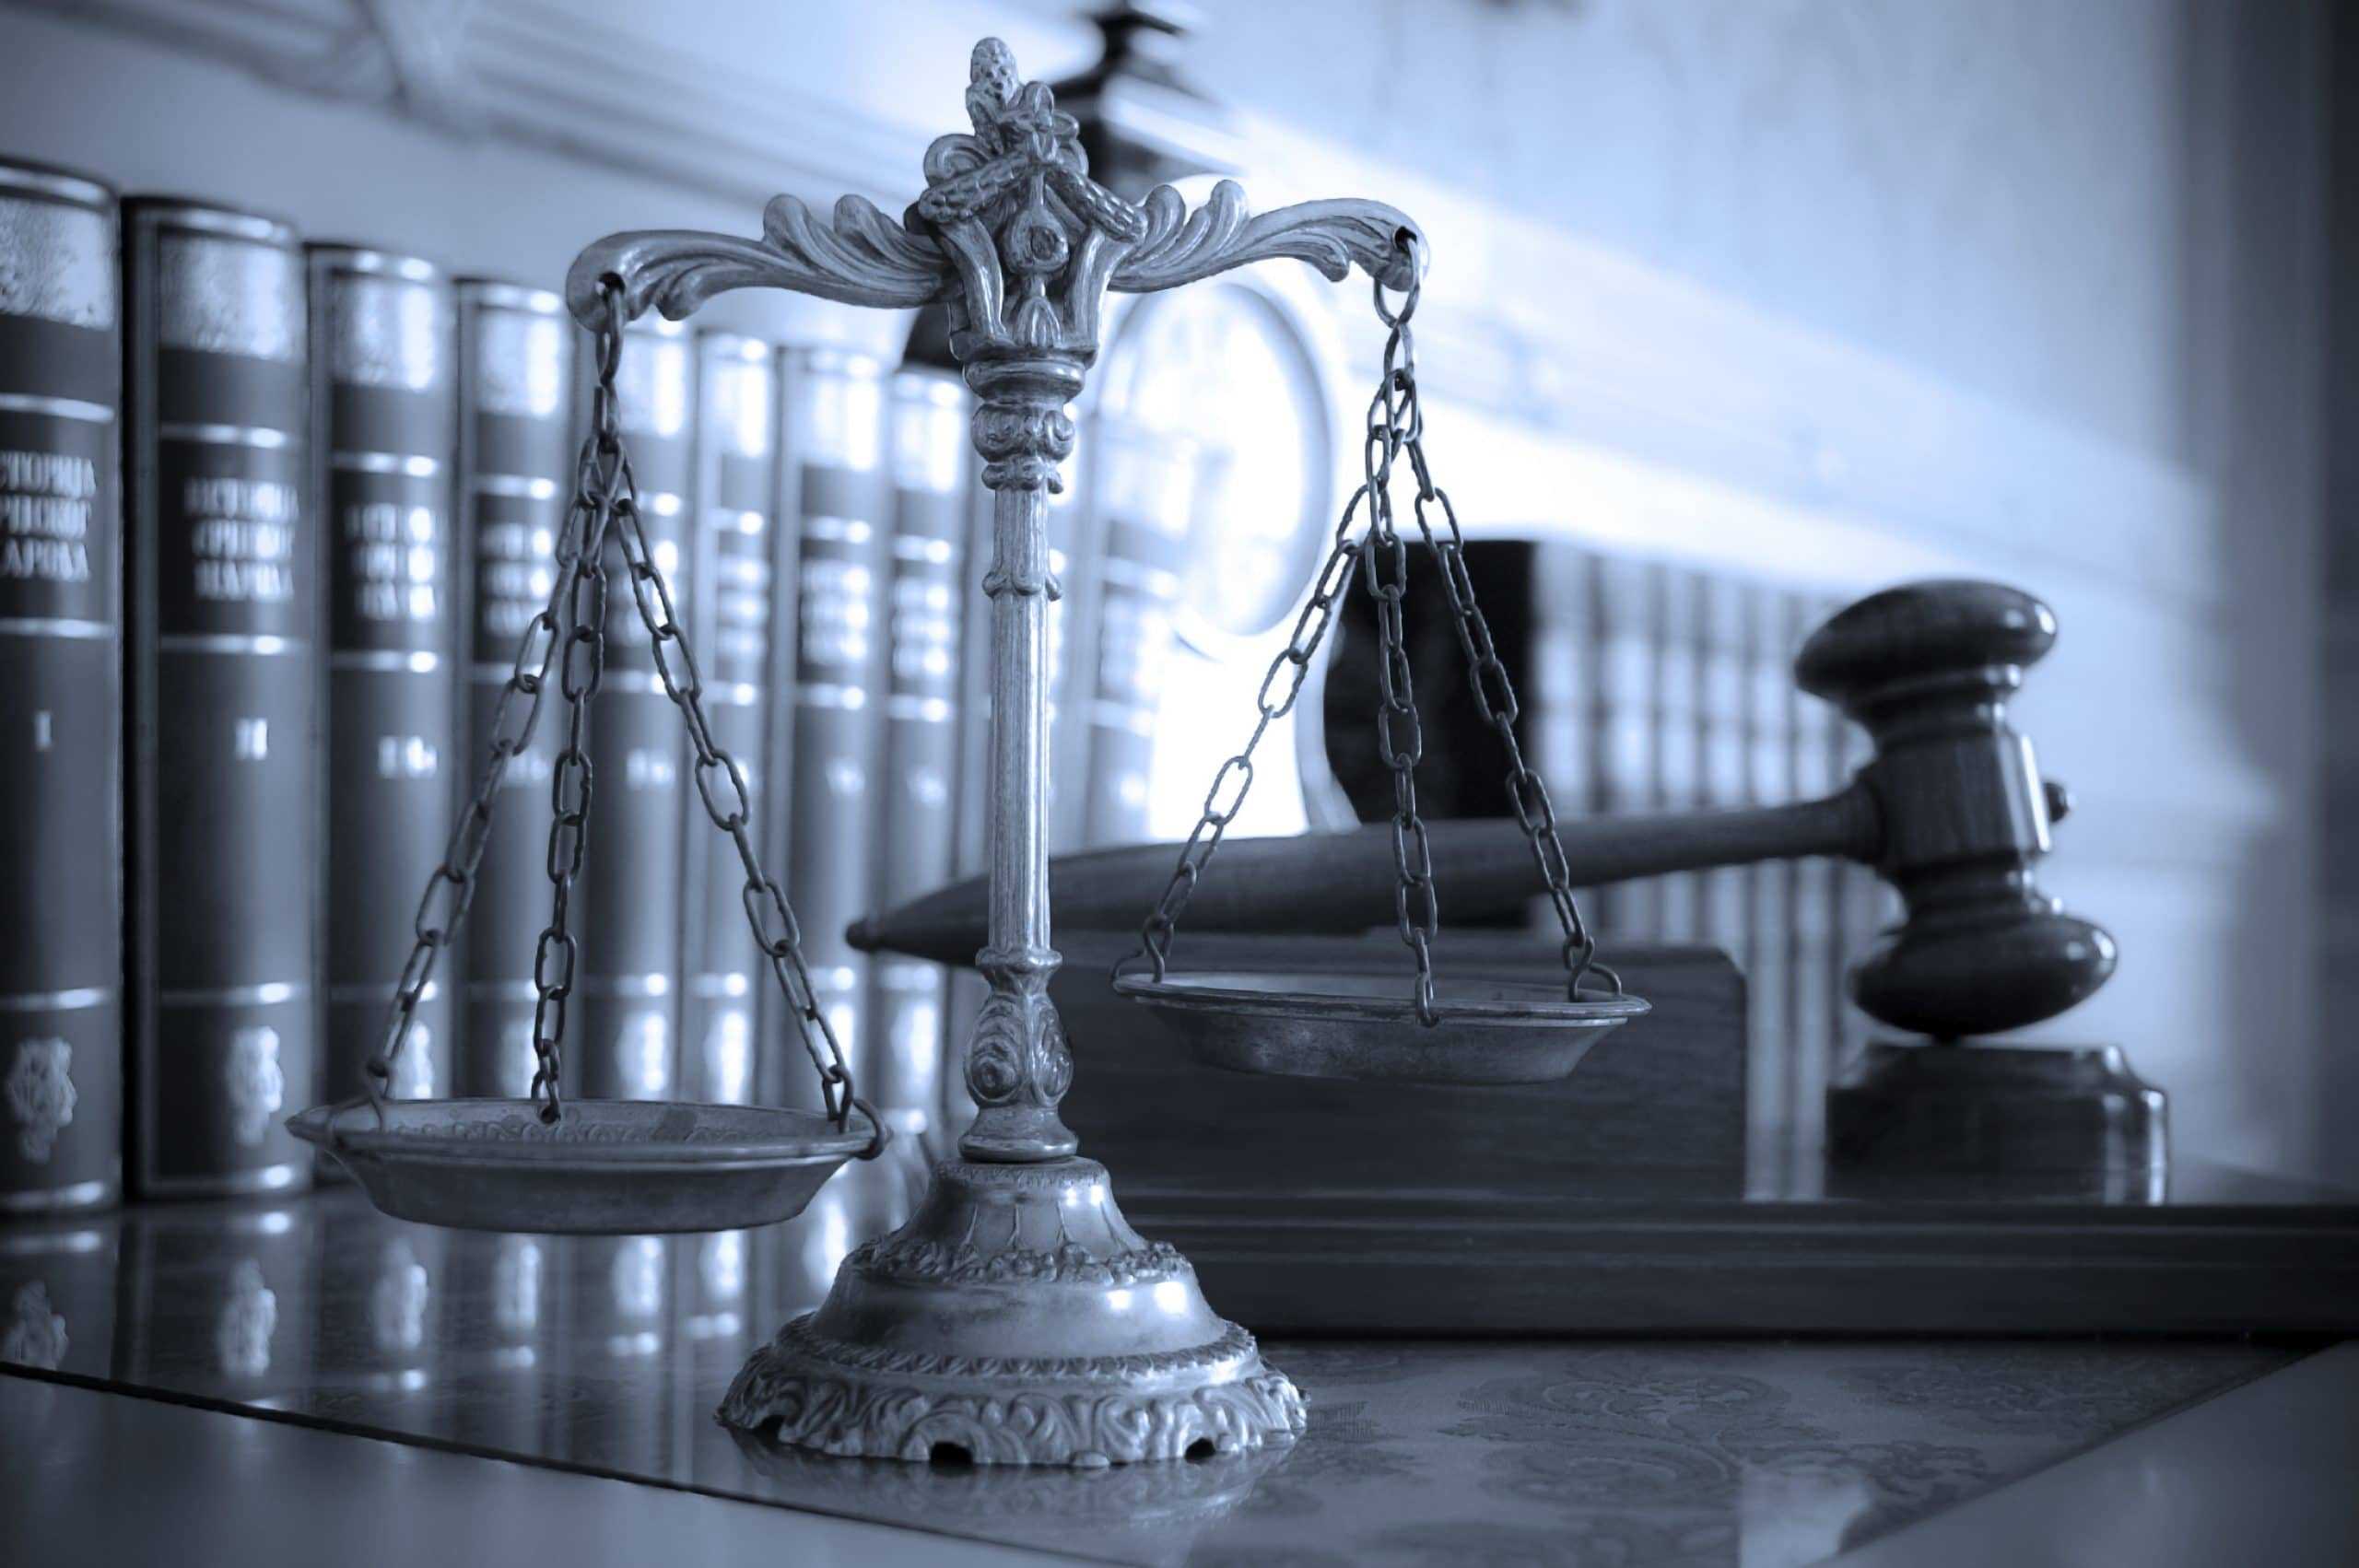 Scale of justice next to a gavel on a desk with legal books.